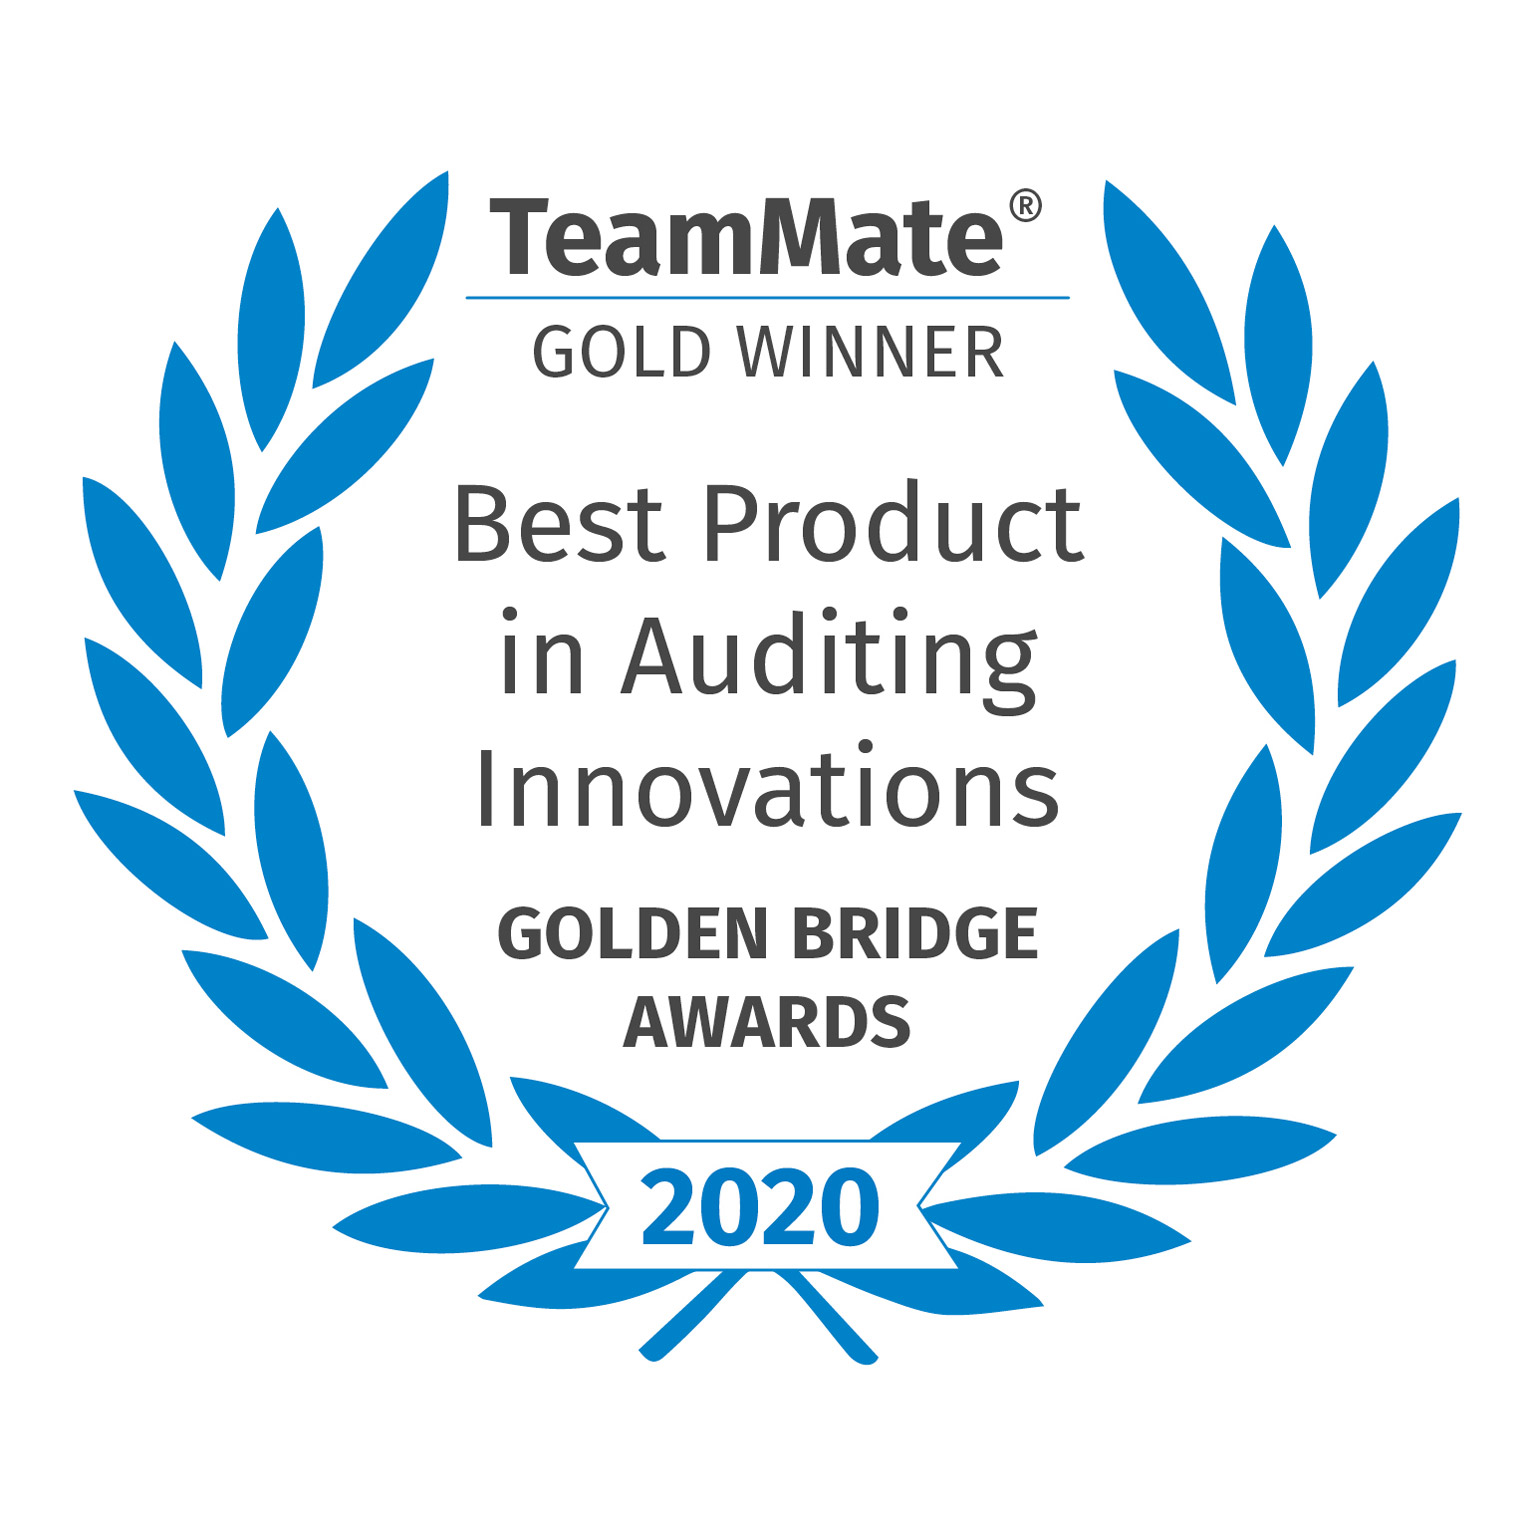 TeamMate Golden Bridge Awards 2020 Best Product in Auditing Innovations